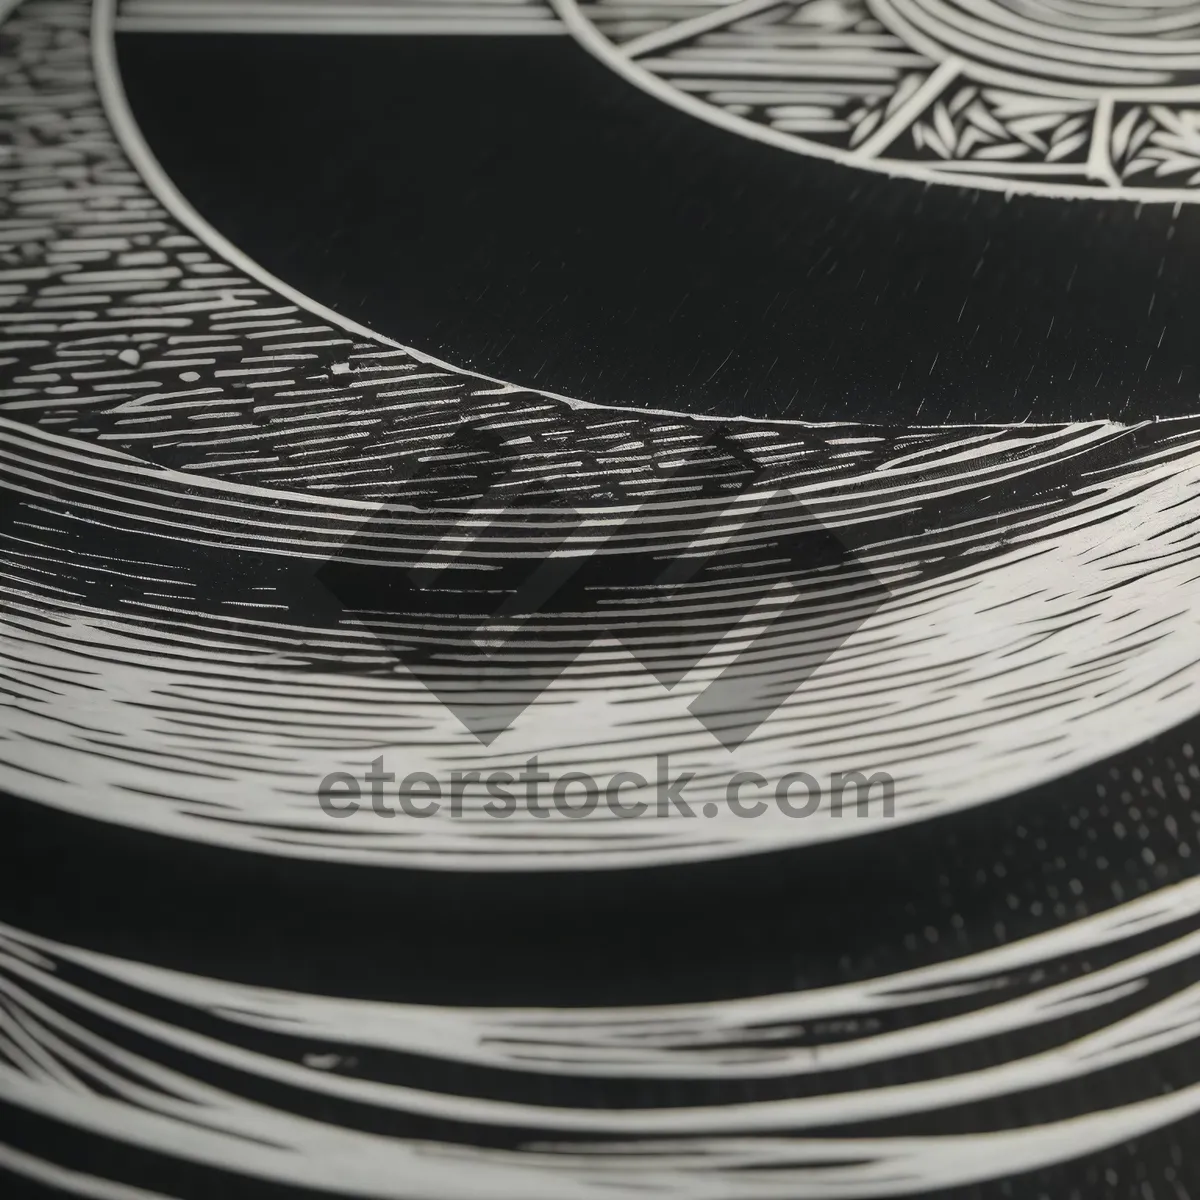 Picture of Shimmering Liquid Ripples on Reflective Circle